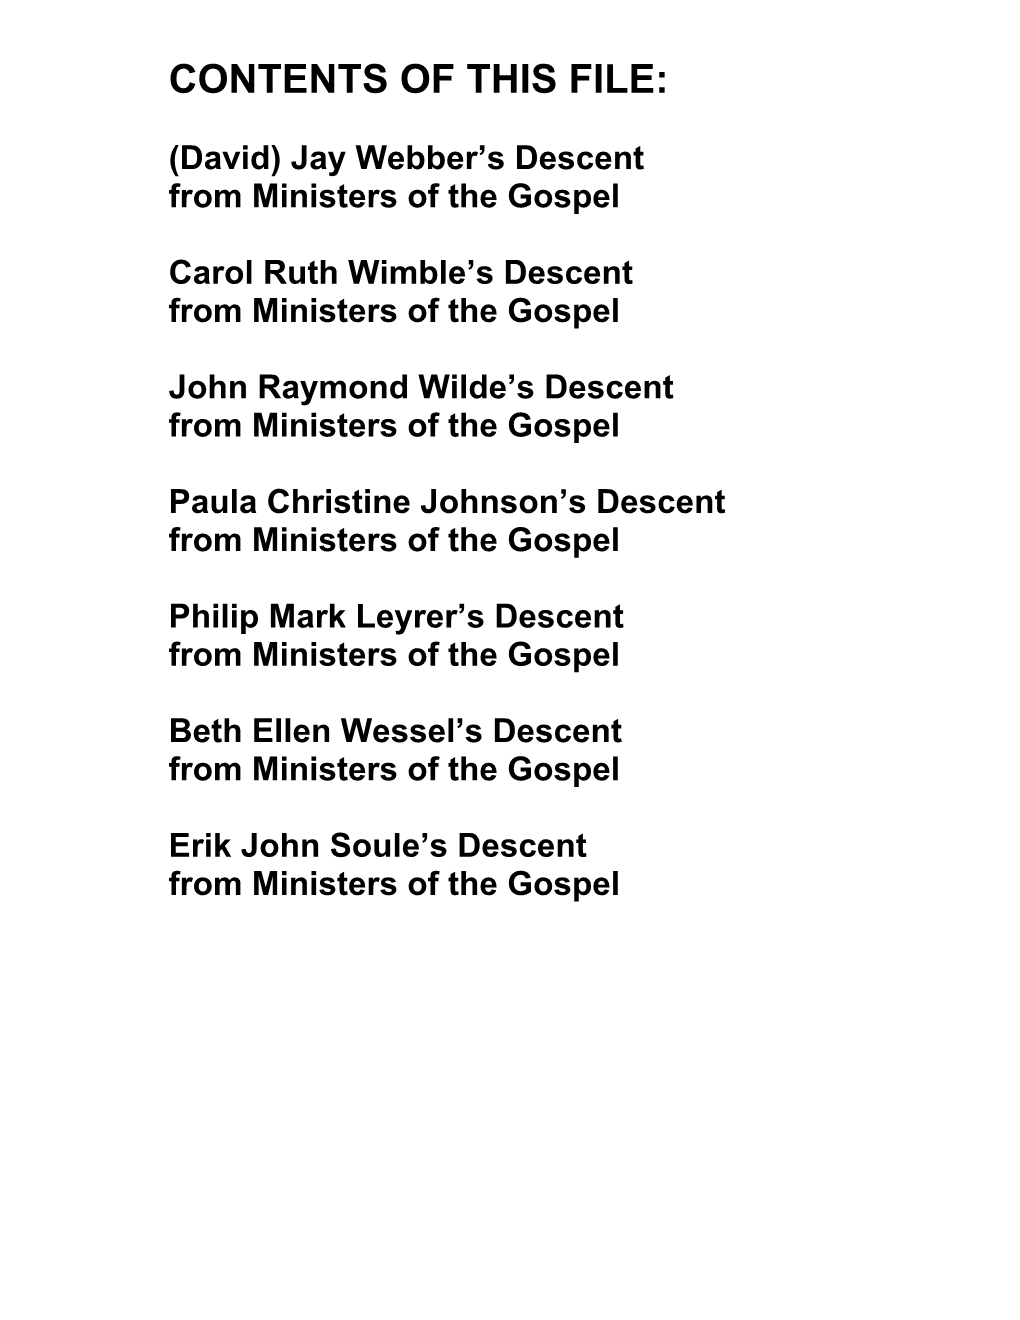 Descent from Ministers of the Gospel